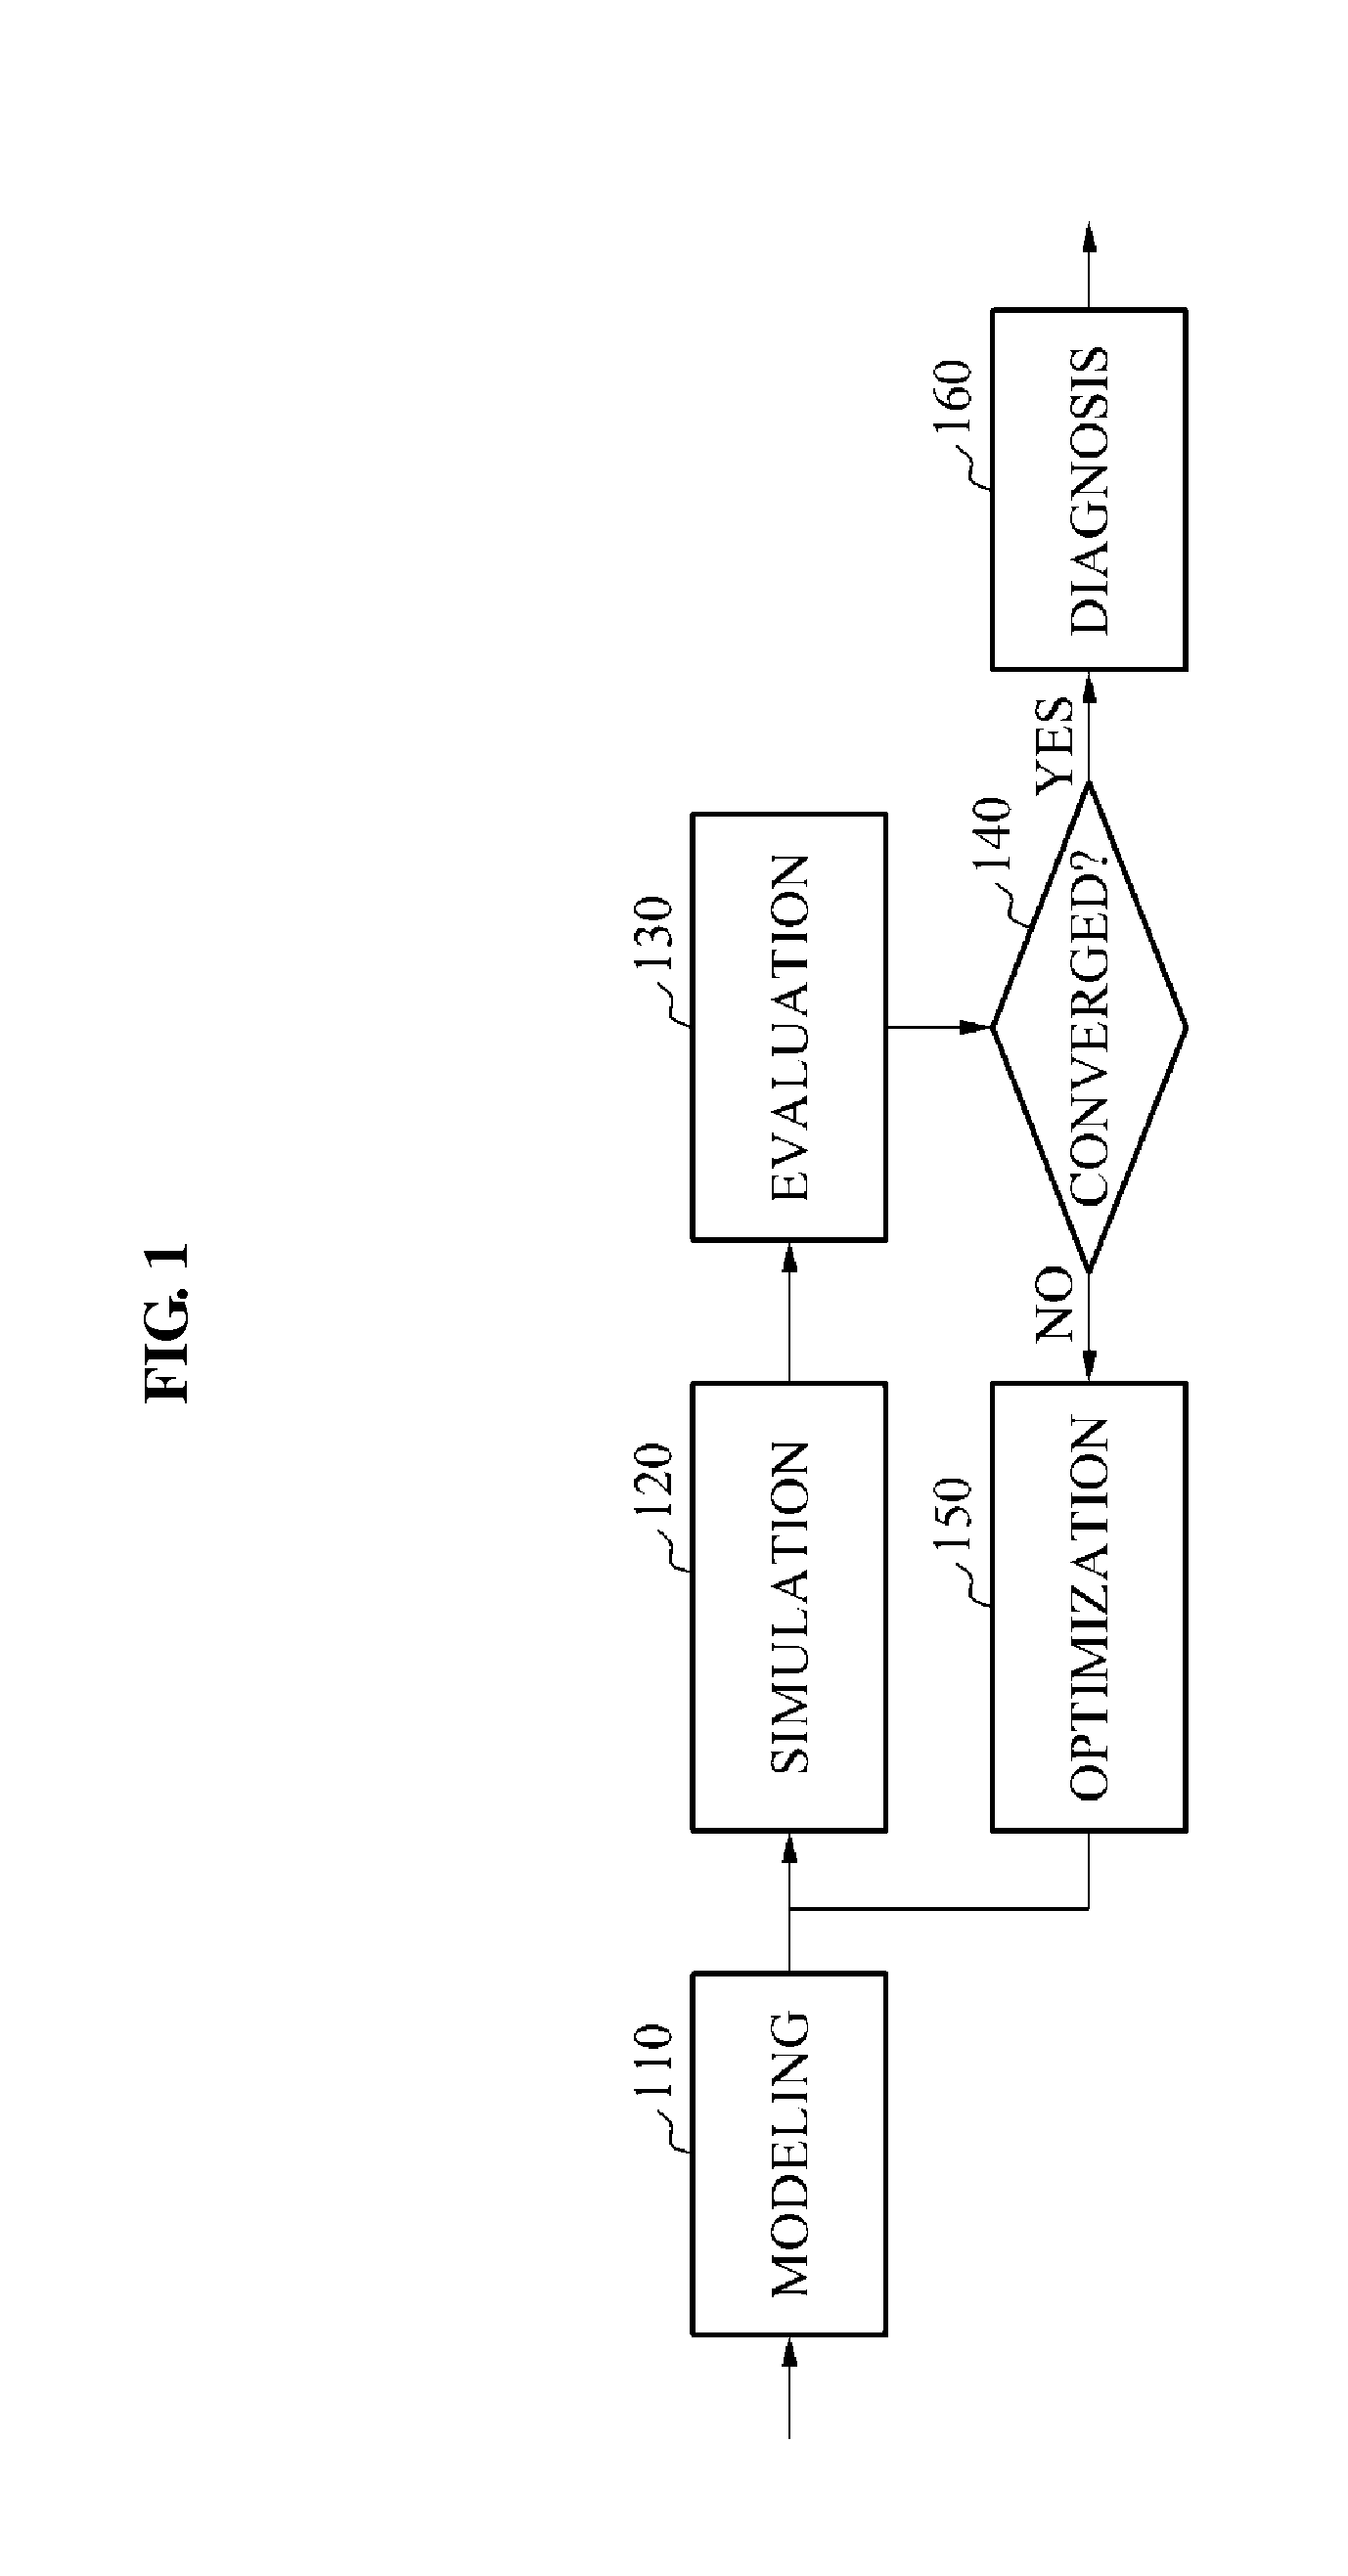 Method and apparatus of diagnosing cardiac diseases based on modeling of cardiac motion